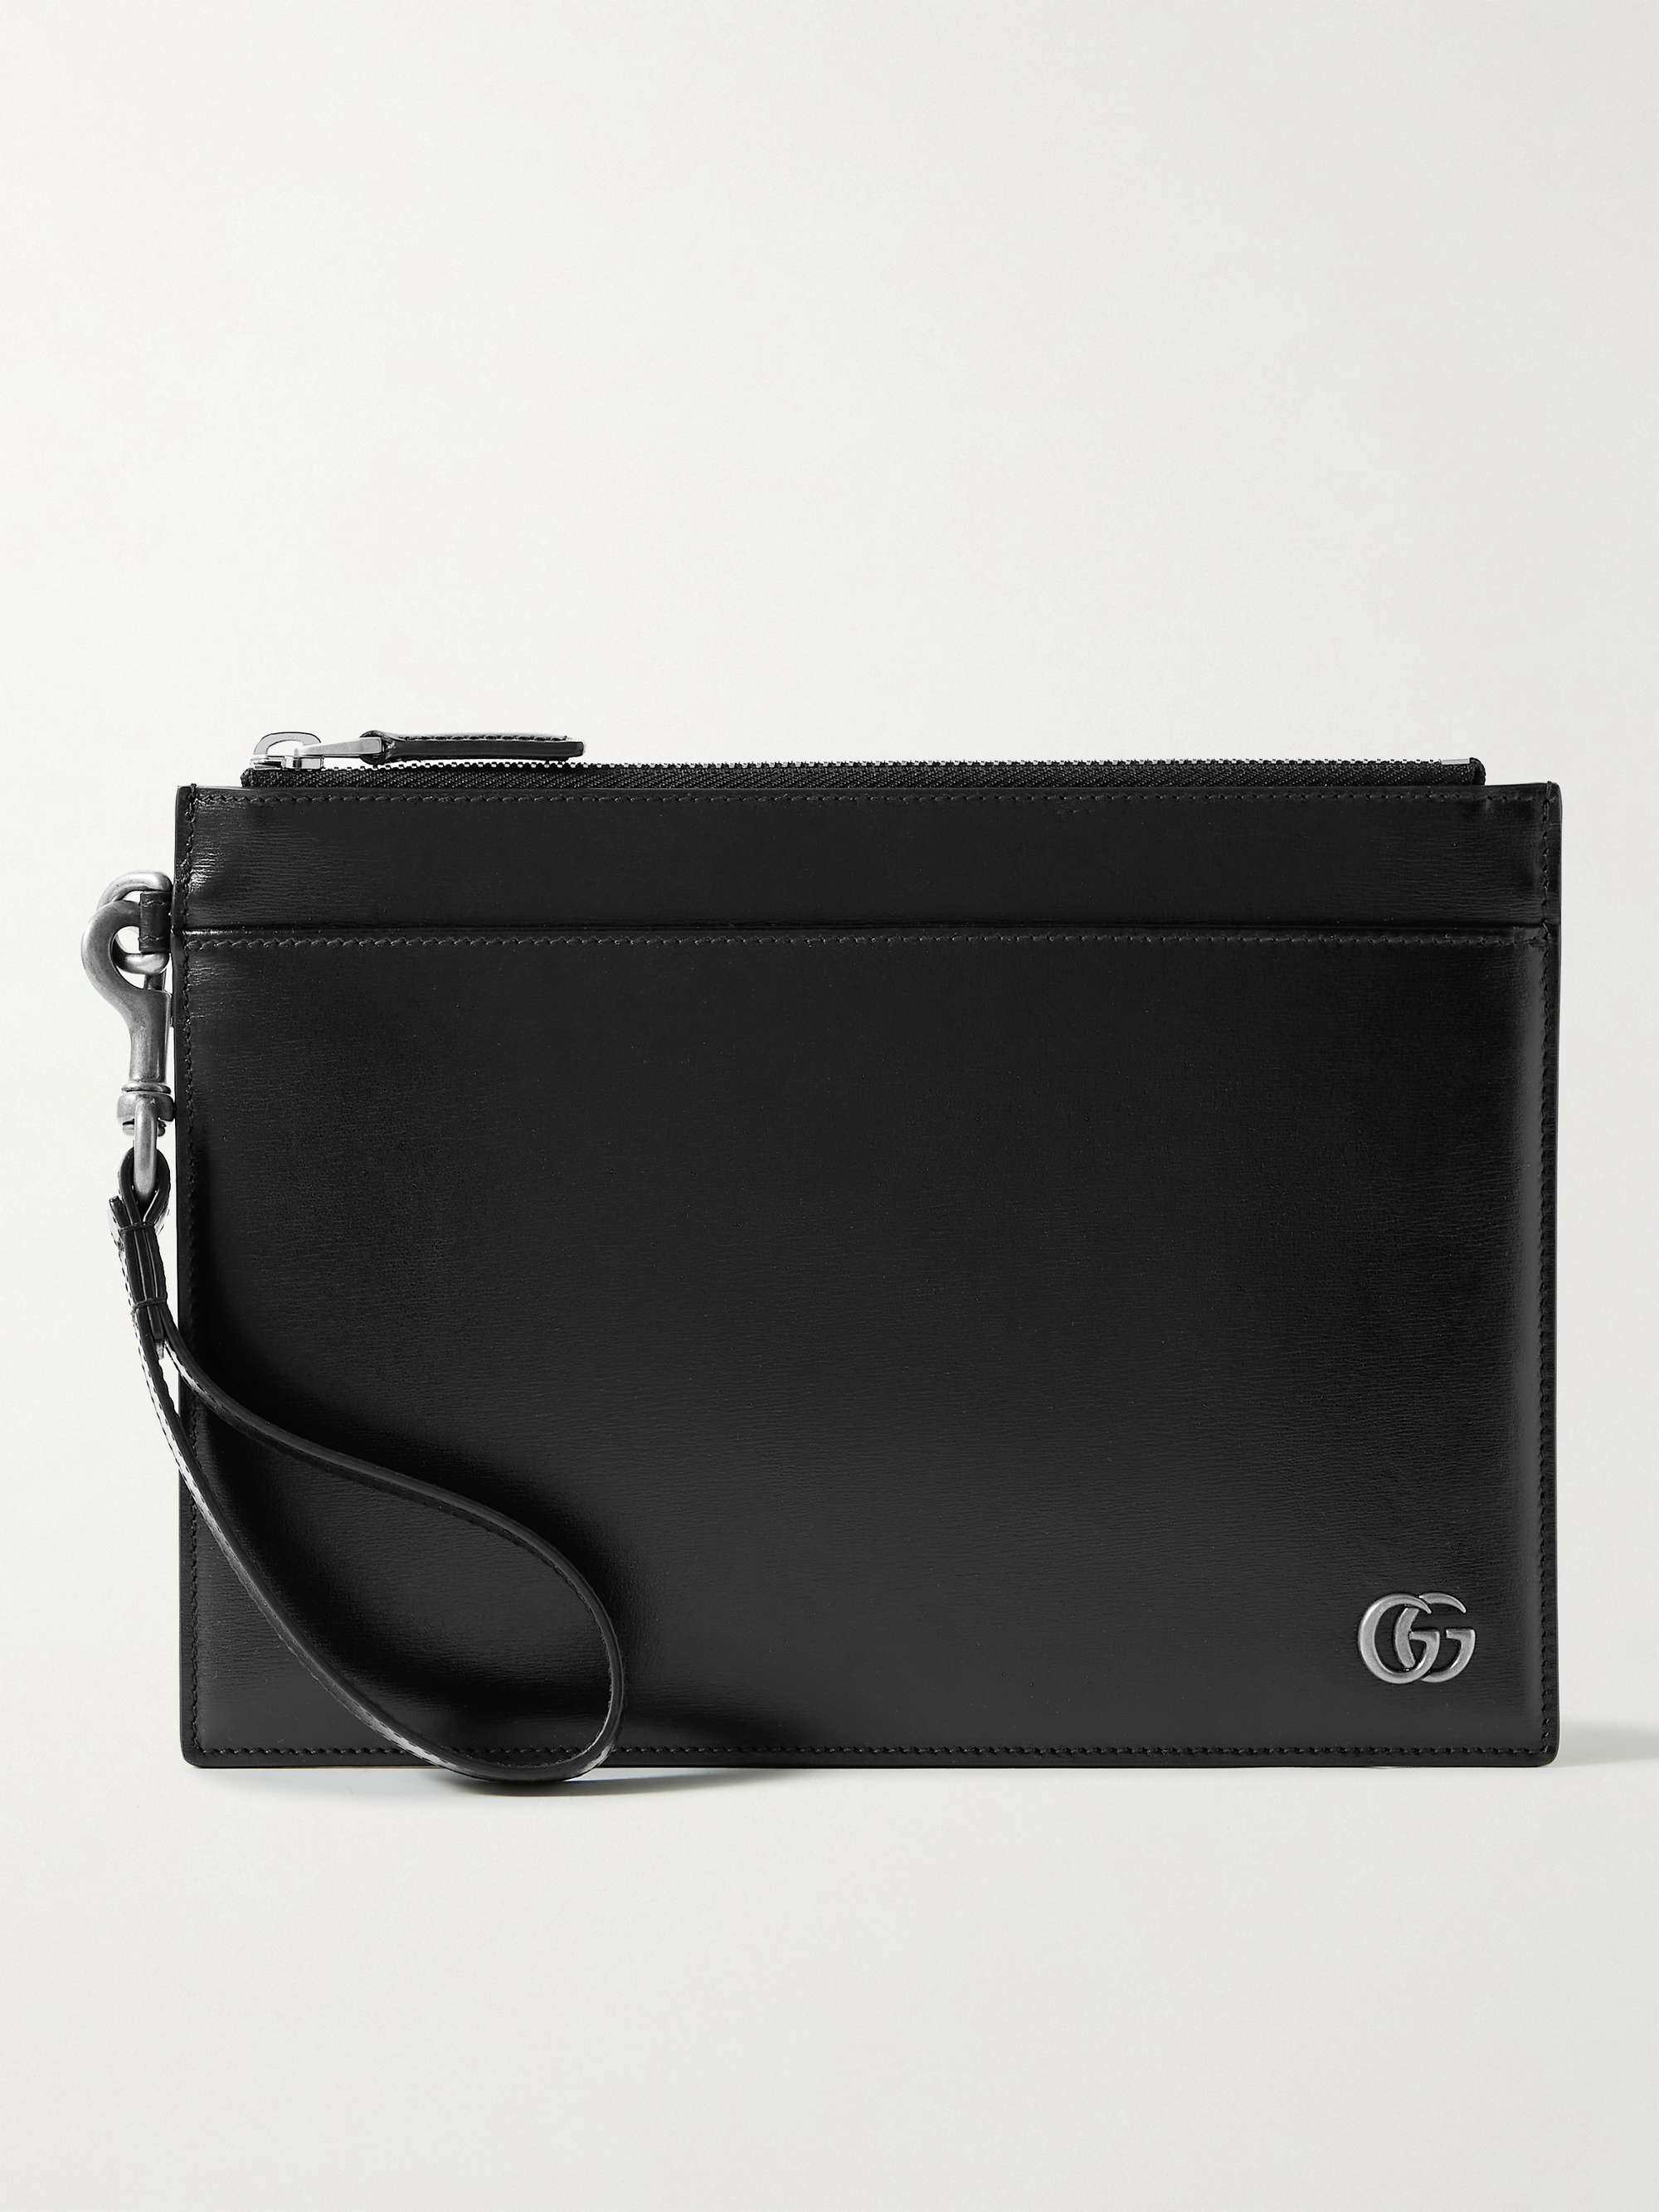 GUCCI GG Marmont Leather Pouch